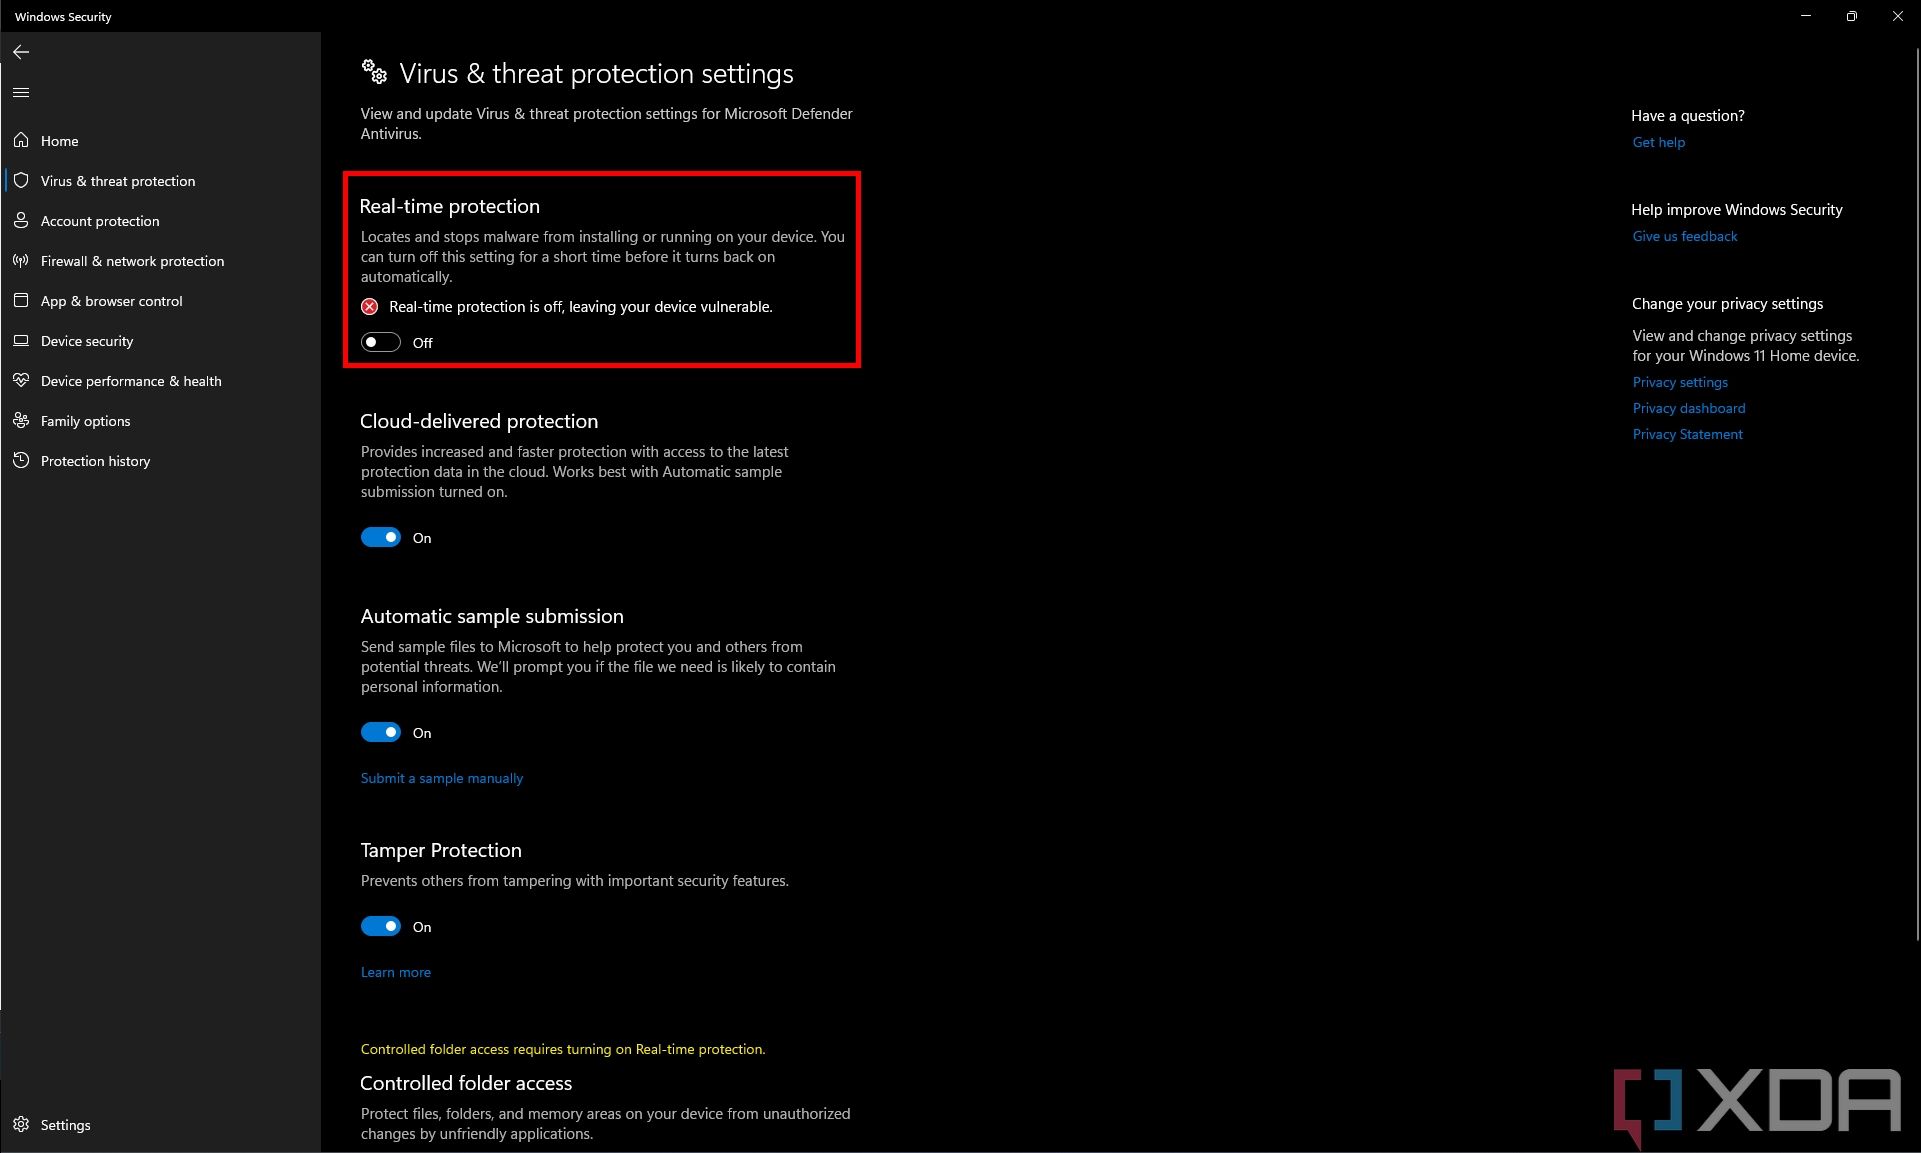 Screenshot of the Virus & threat protection settings page in Windows Security showing that real-time protection is turned off.